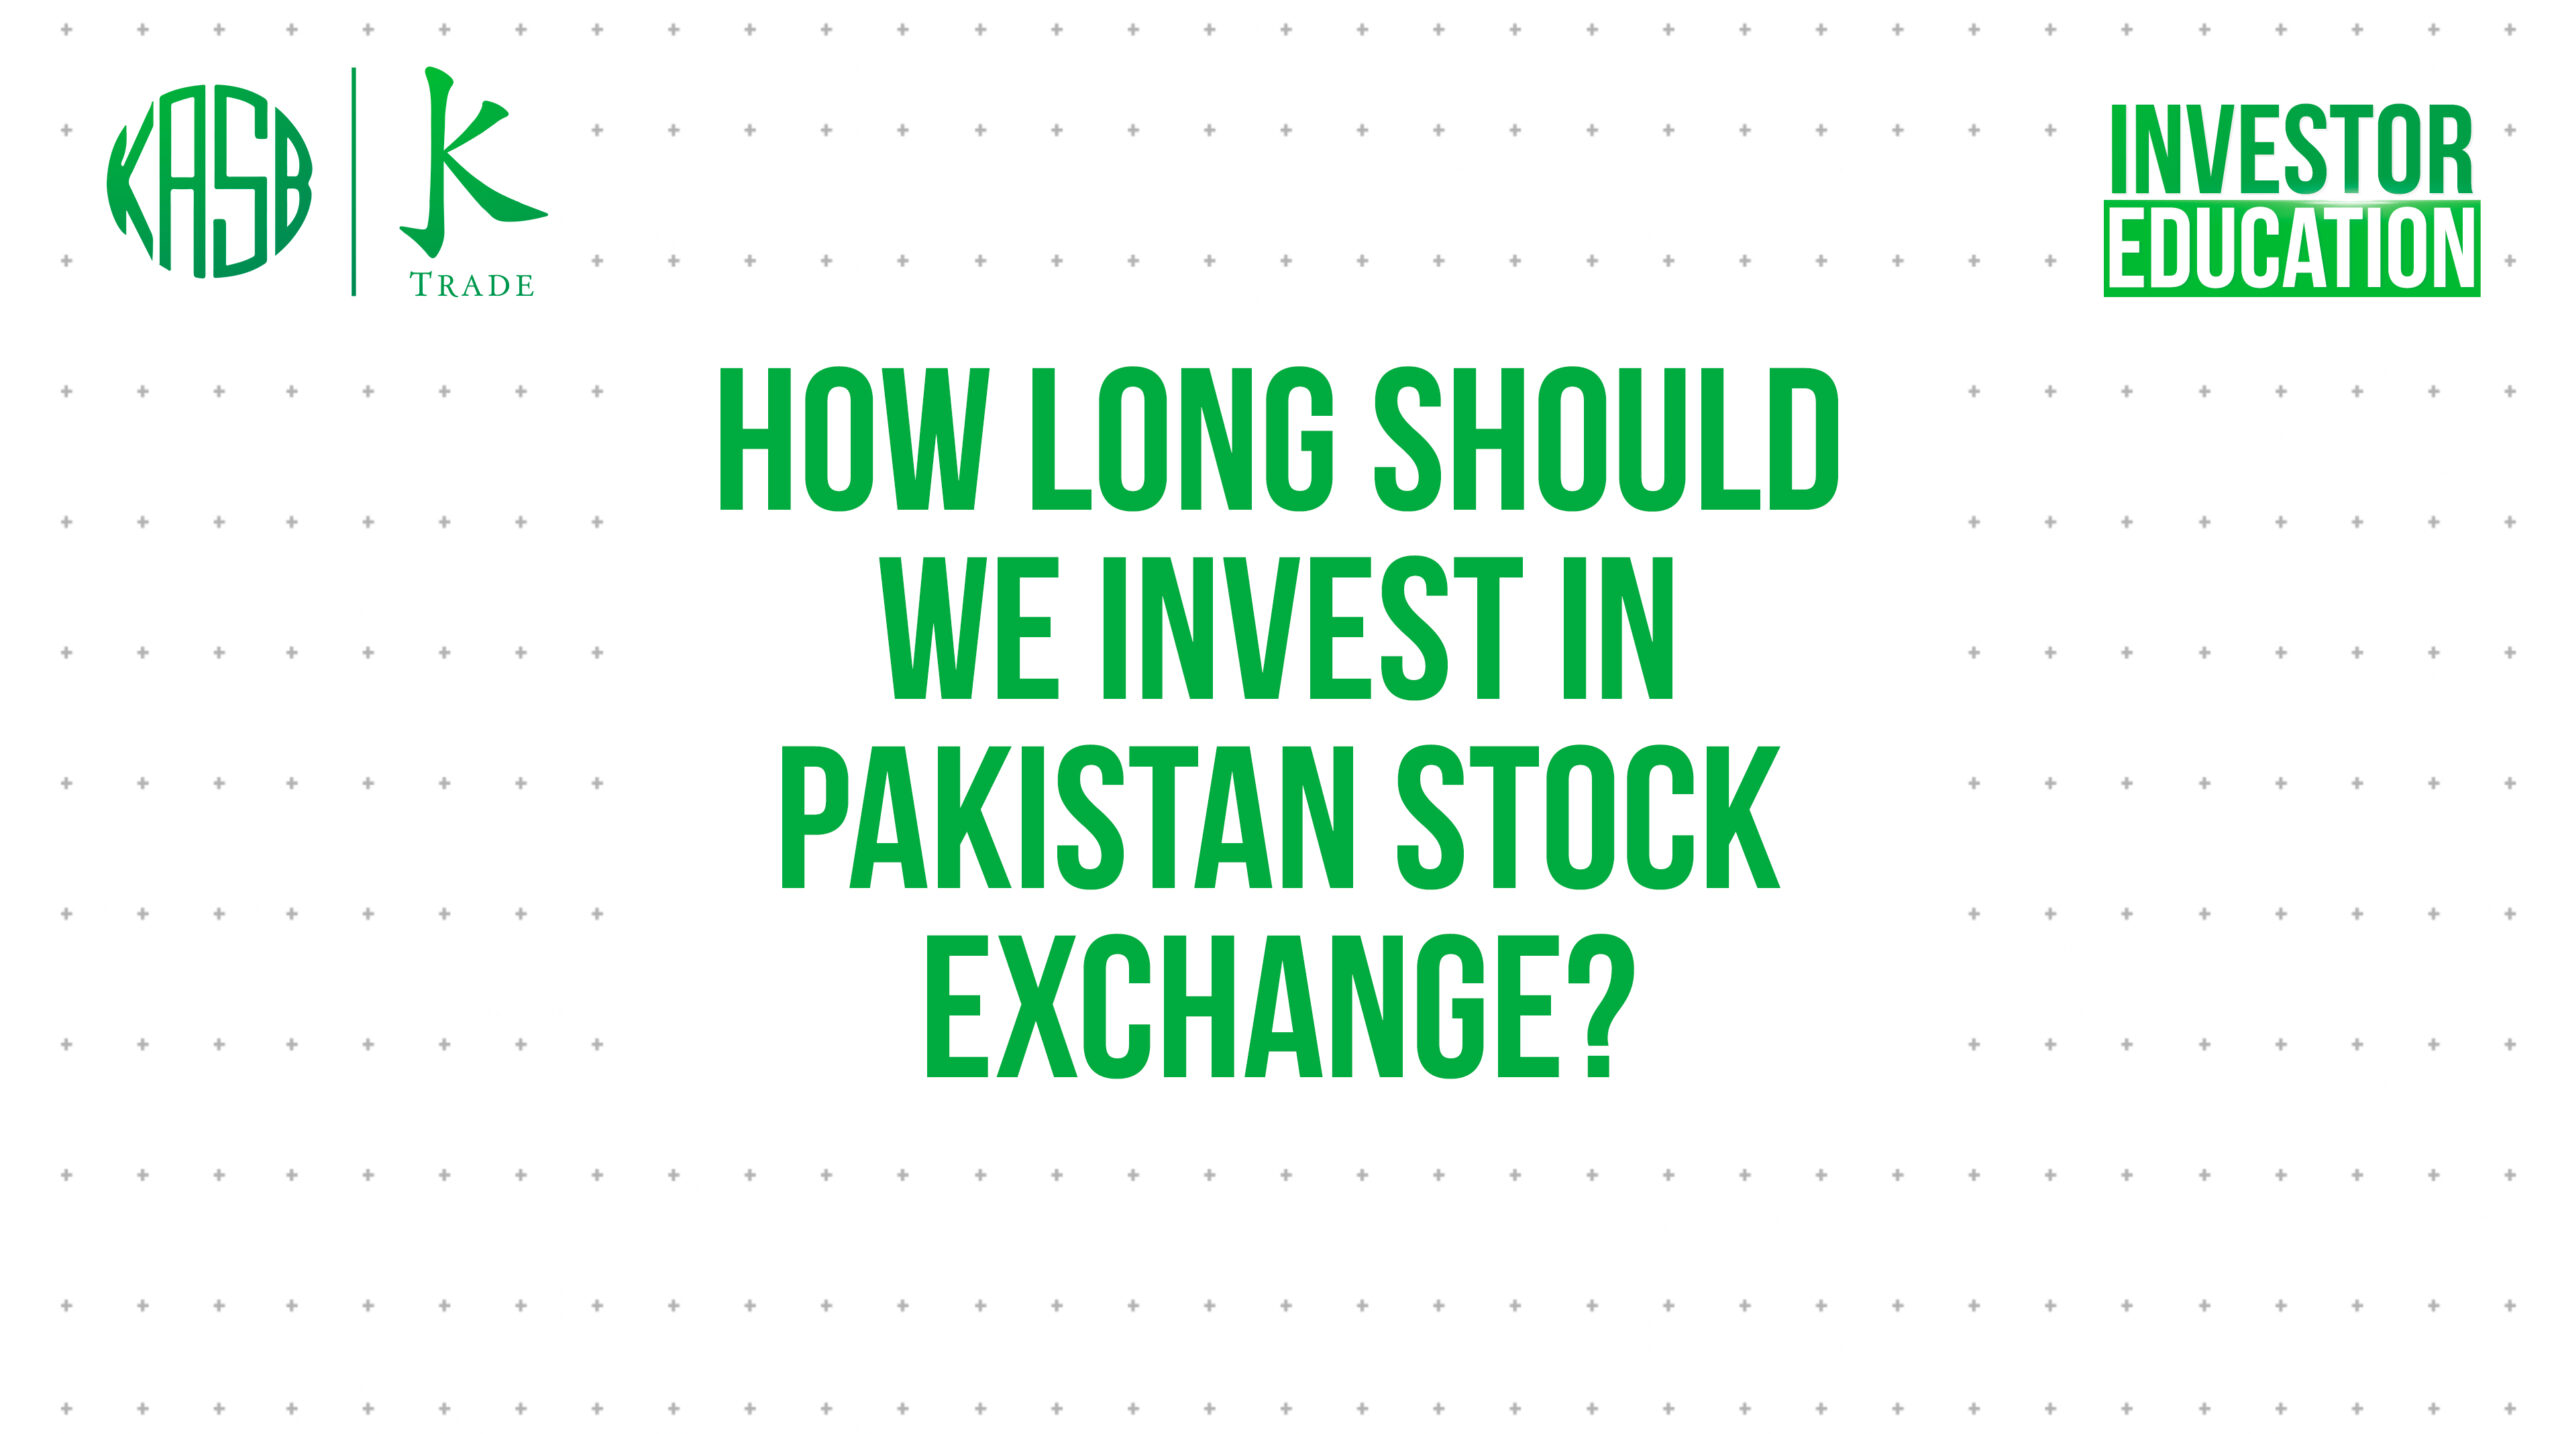 How Long Should We Invest in Pakistan Stock Exchange scaled